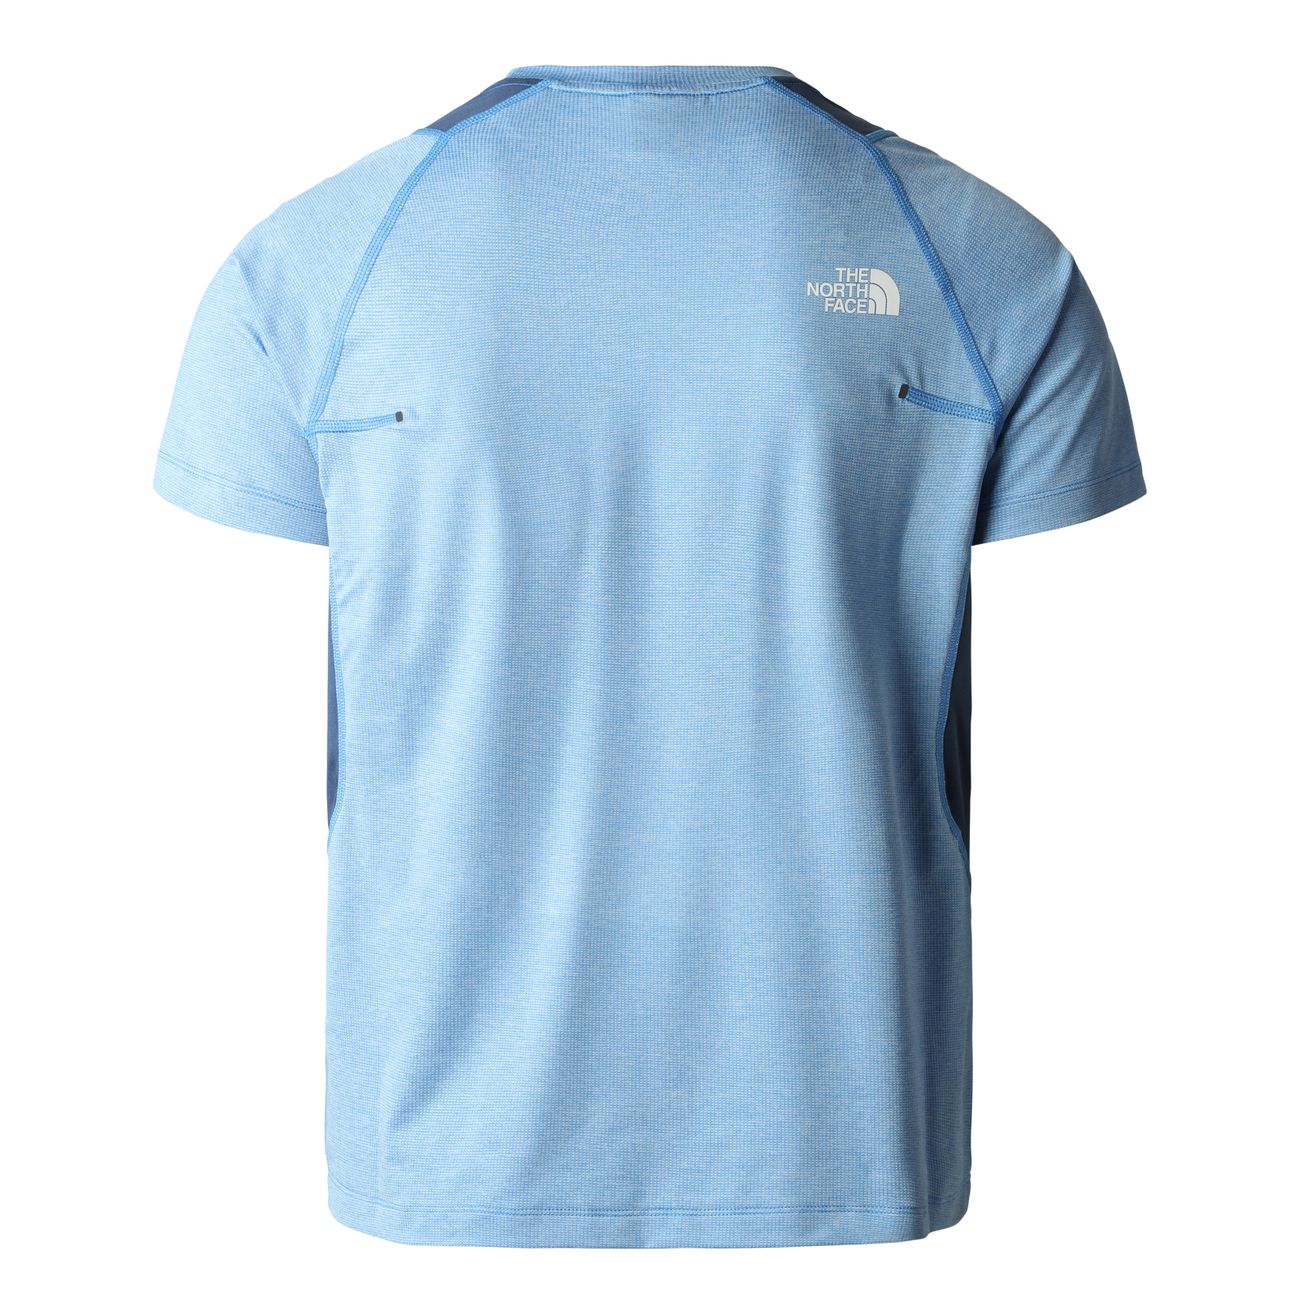 THE NORTH FACE M AO GLACIER TEE Herren T-Shirt - The North Face - SAGATOO - 196012626809